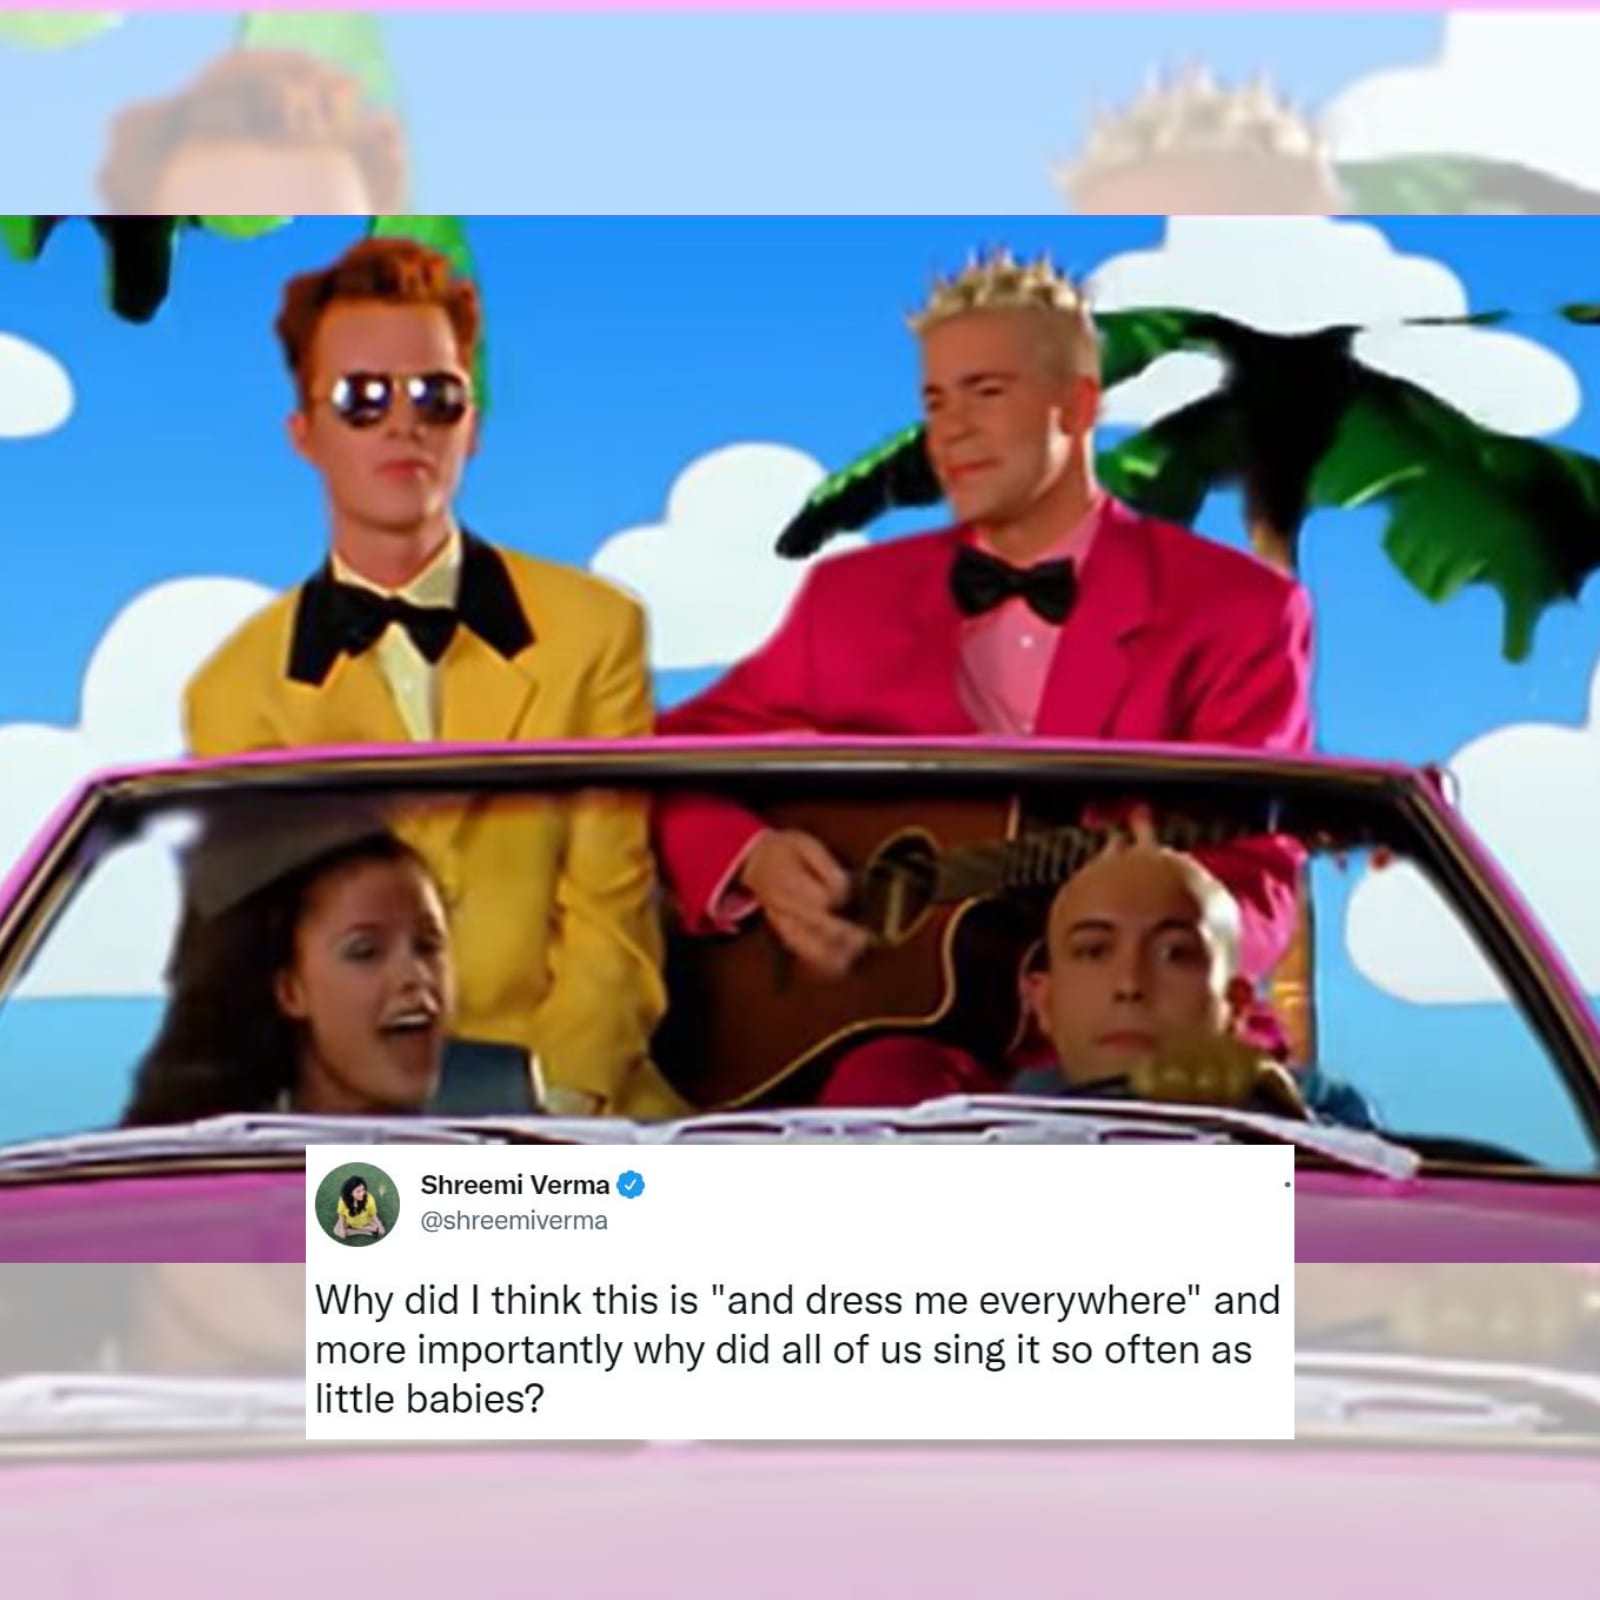 Millennials Are Only Now Getting the Lyrics of 'Barbie Girl' and It's Peak 2021